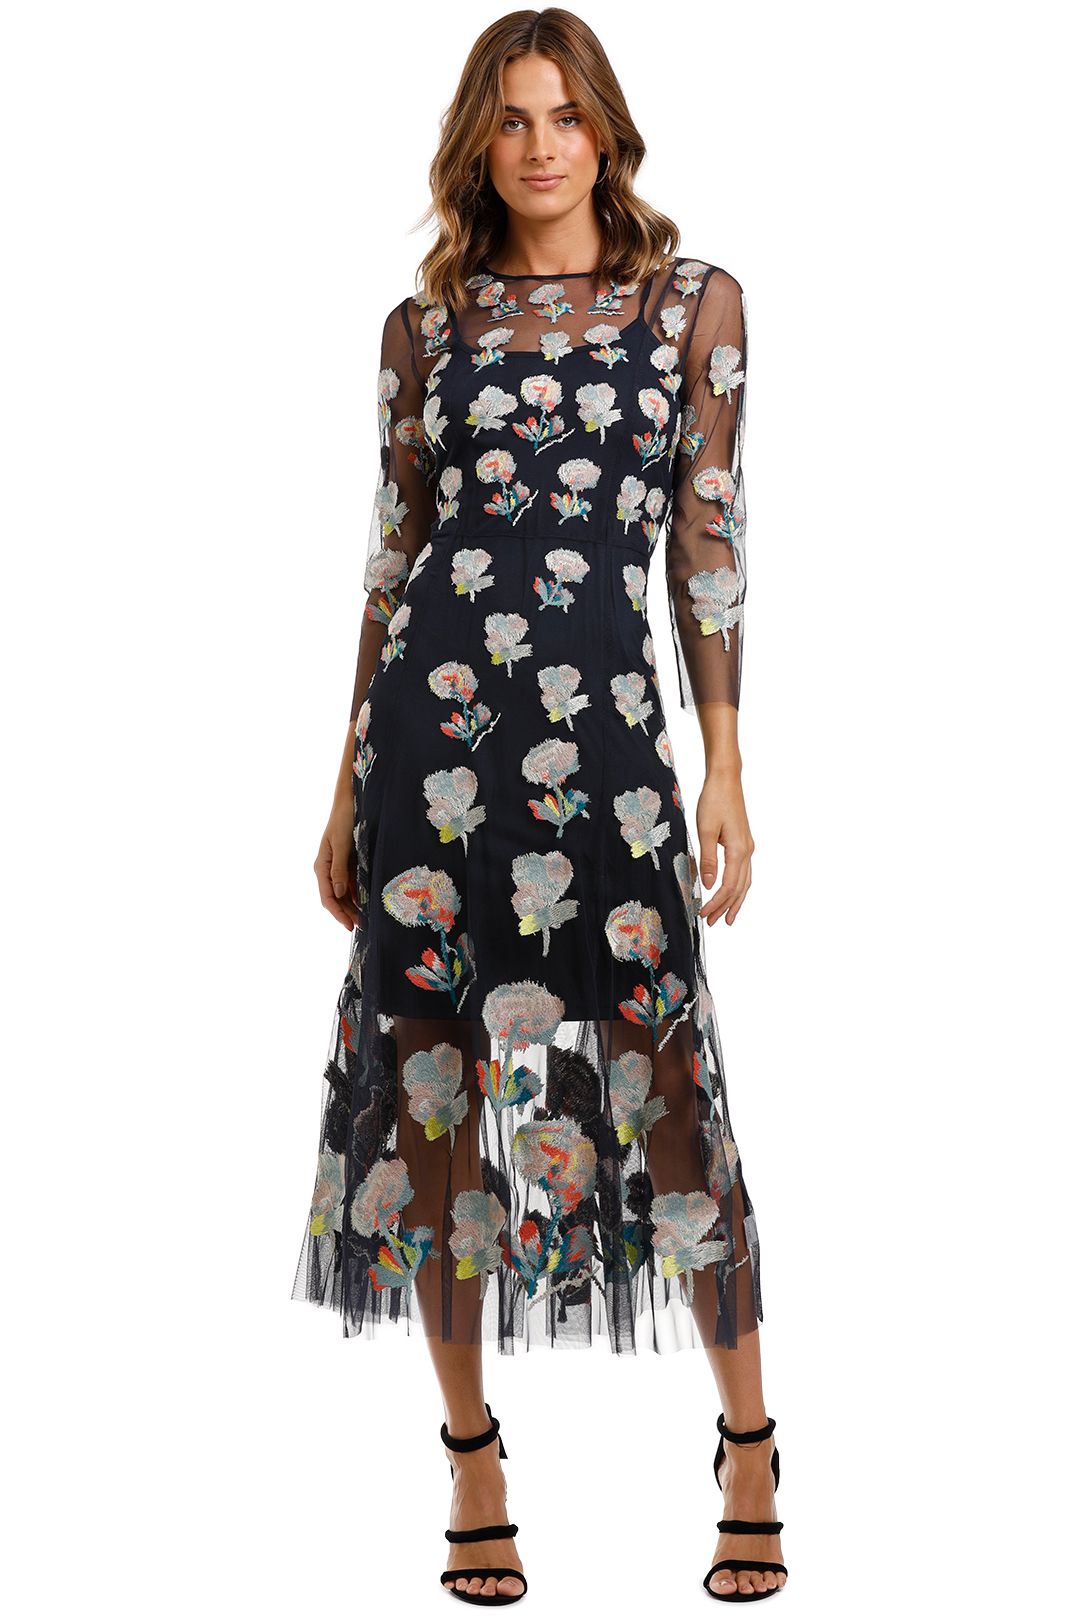 Moss and Spy Monet Dress Ink Multi Florals embroidered